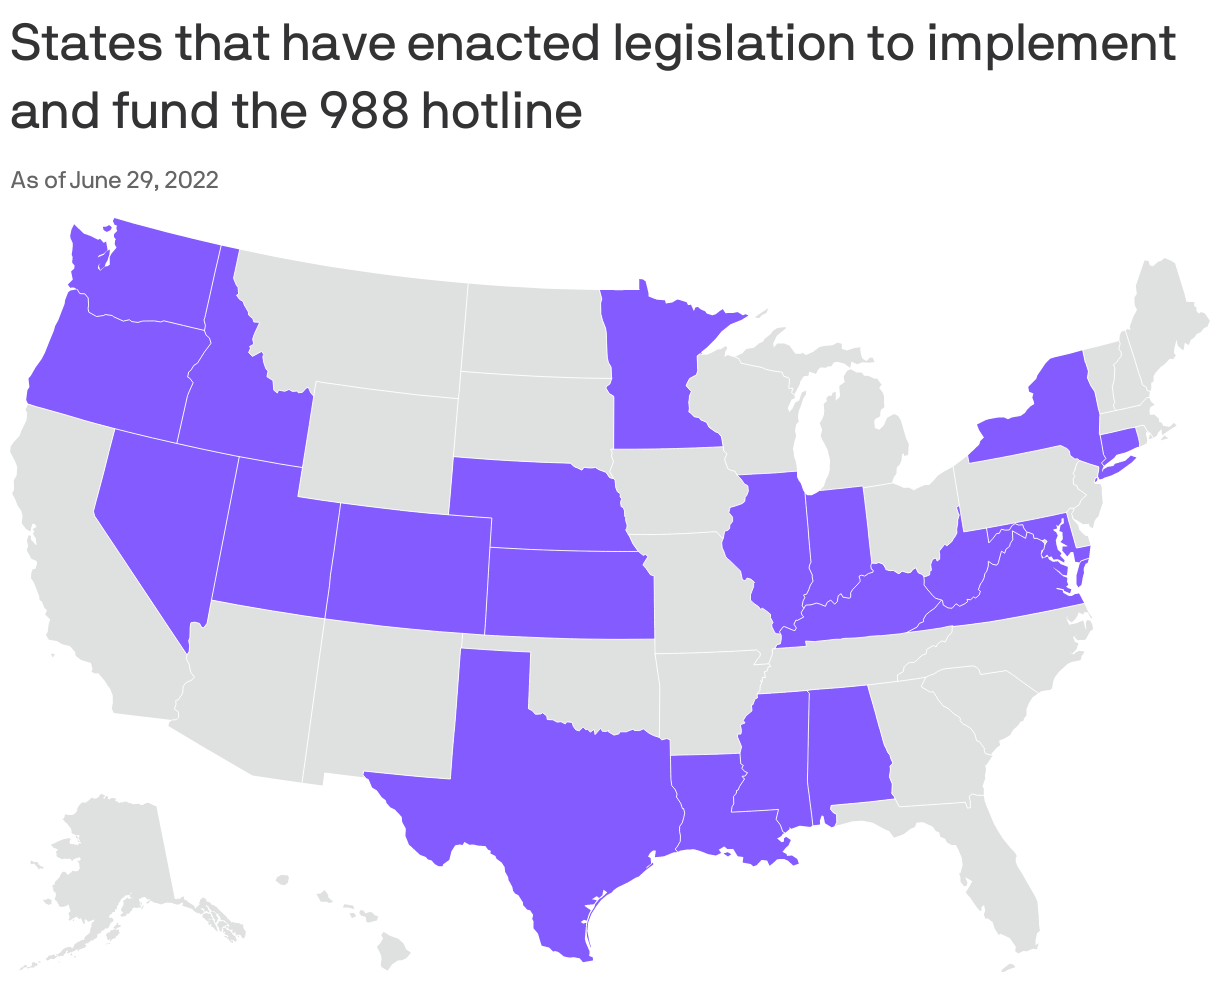 States that have enacted legislation to implement and fund the 988 hotline